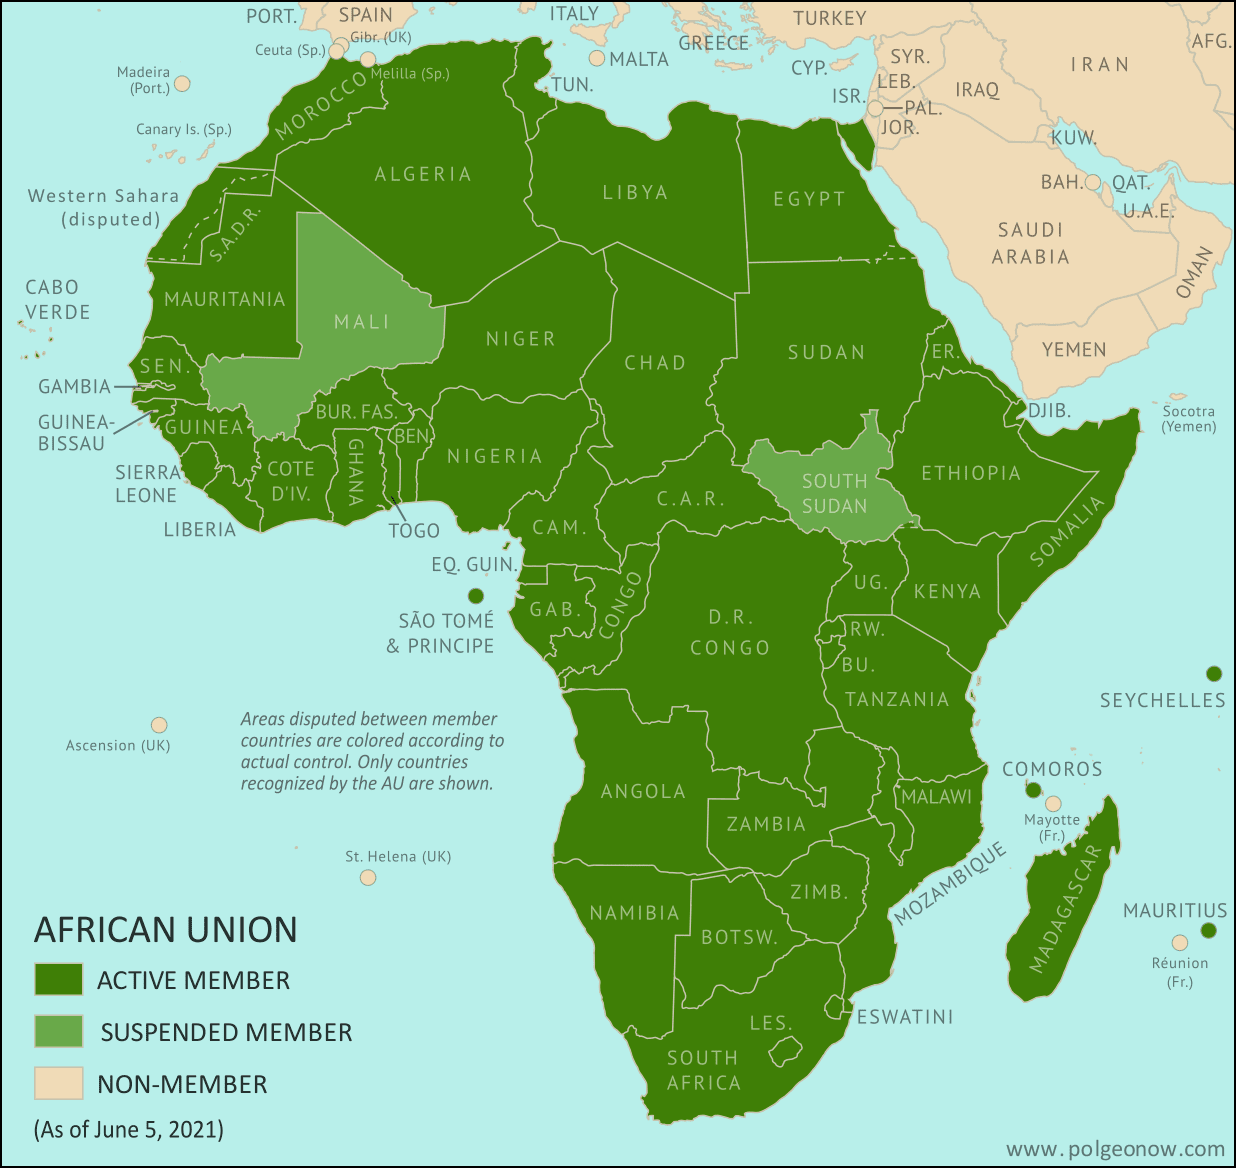 African Union: Map of Africa showing which countries are suspended from the African Union in June 2021, as well as which countries are active members and which territories aren't part of the union. Updated for the June 2021 suspension of Mali, the country's third time being suspended, and its second time in less than a year (colorblind accessible).